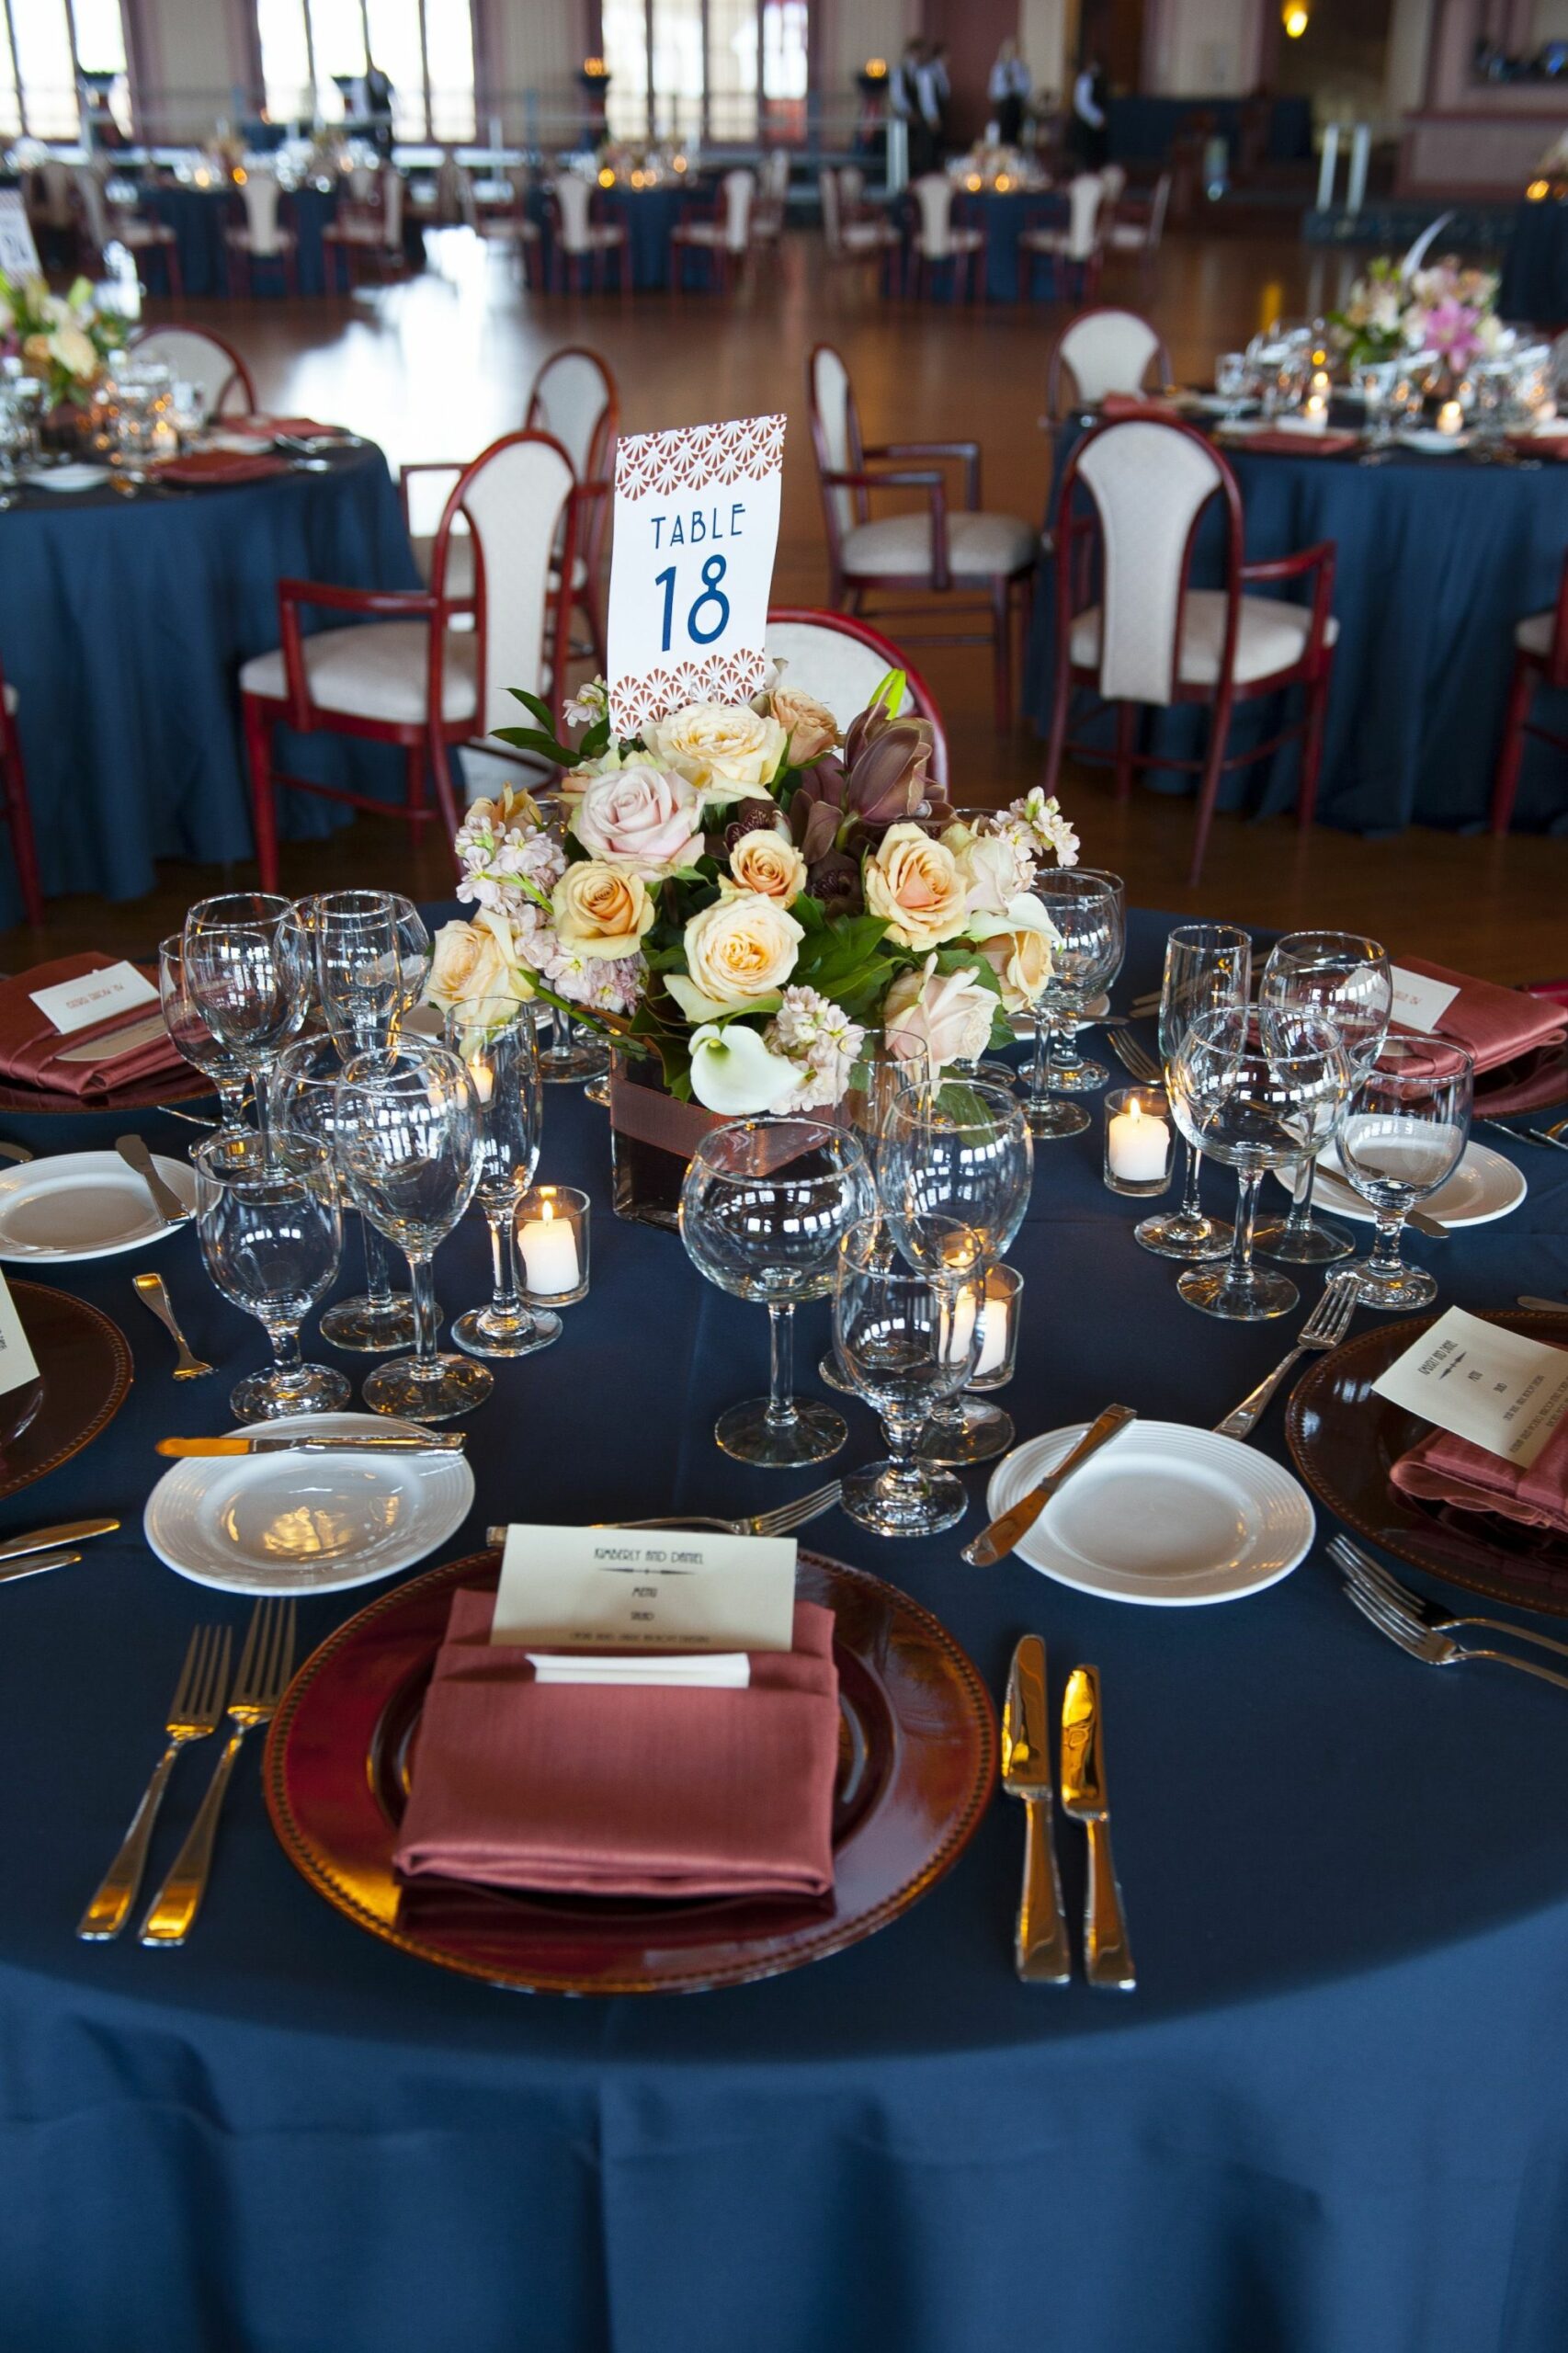 Love the color tablecloths with the accent napkins and chairs